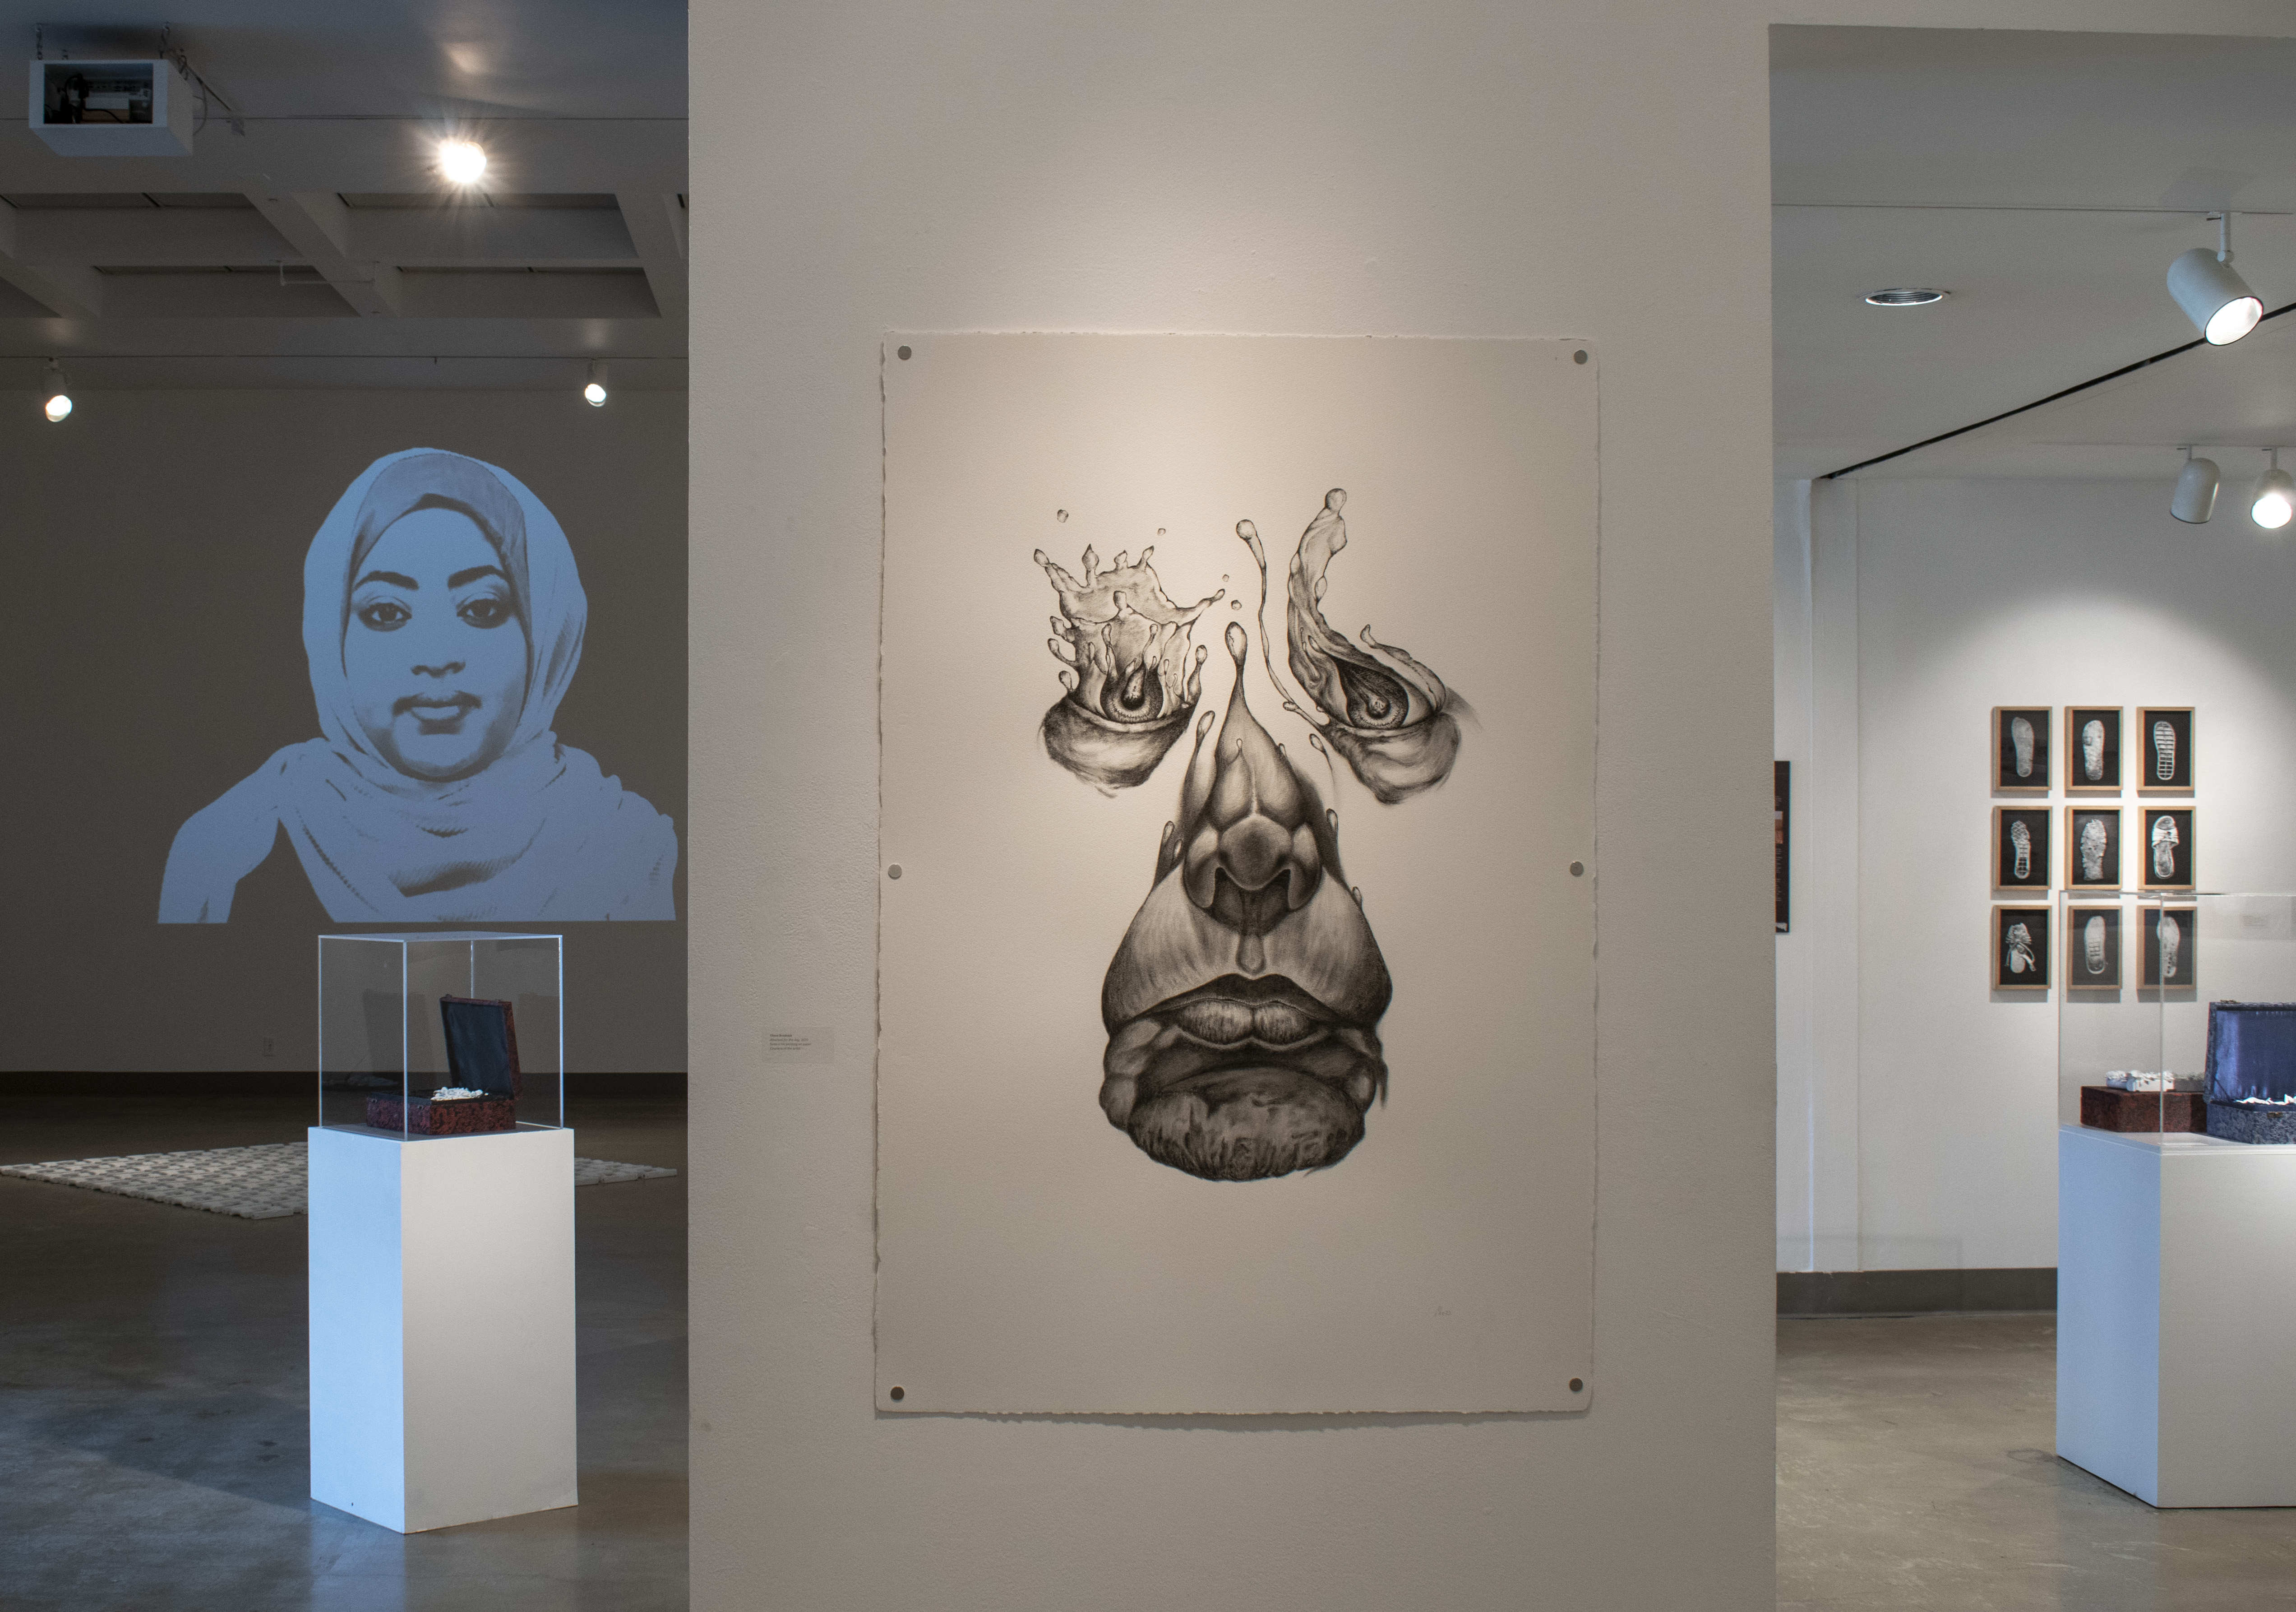 Installation View, Front West Gallery, Black, White & Shades of Grey Exhibition, Jan. 18, 2022 to Mar. 27, 2022.